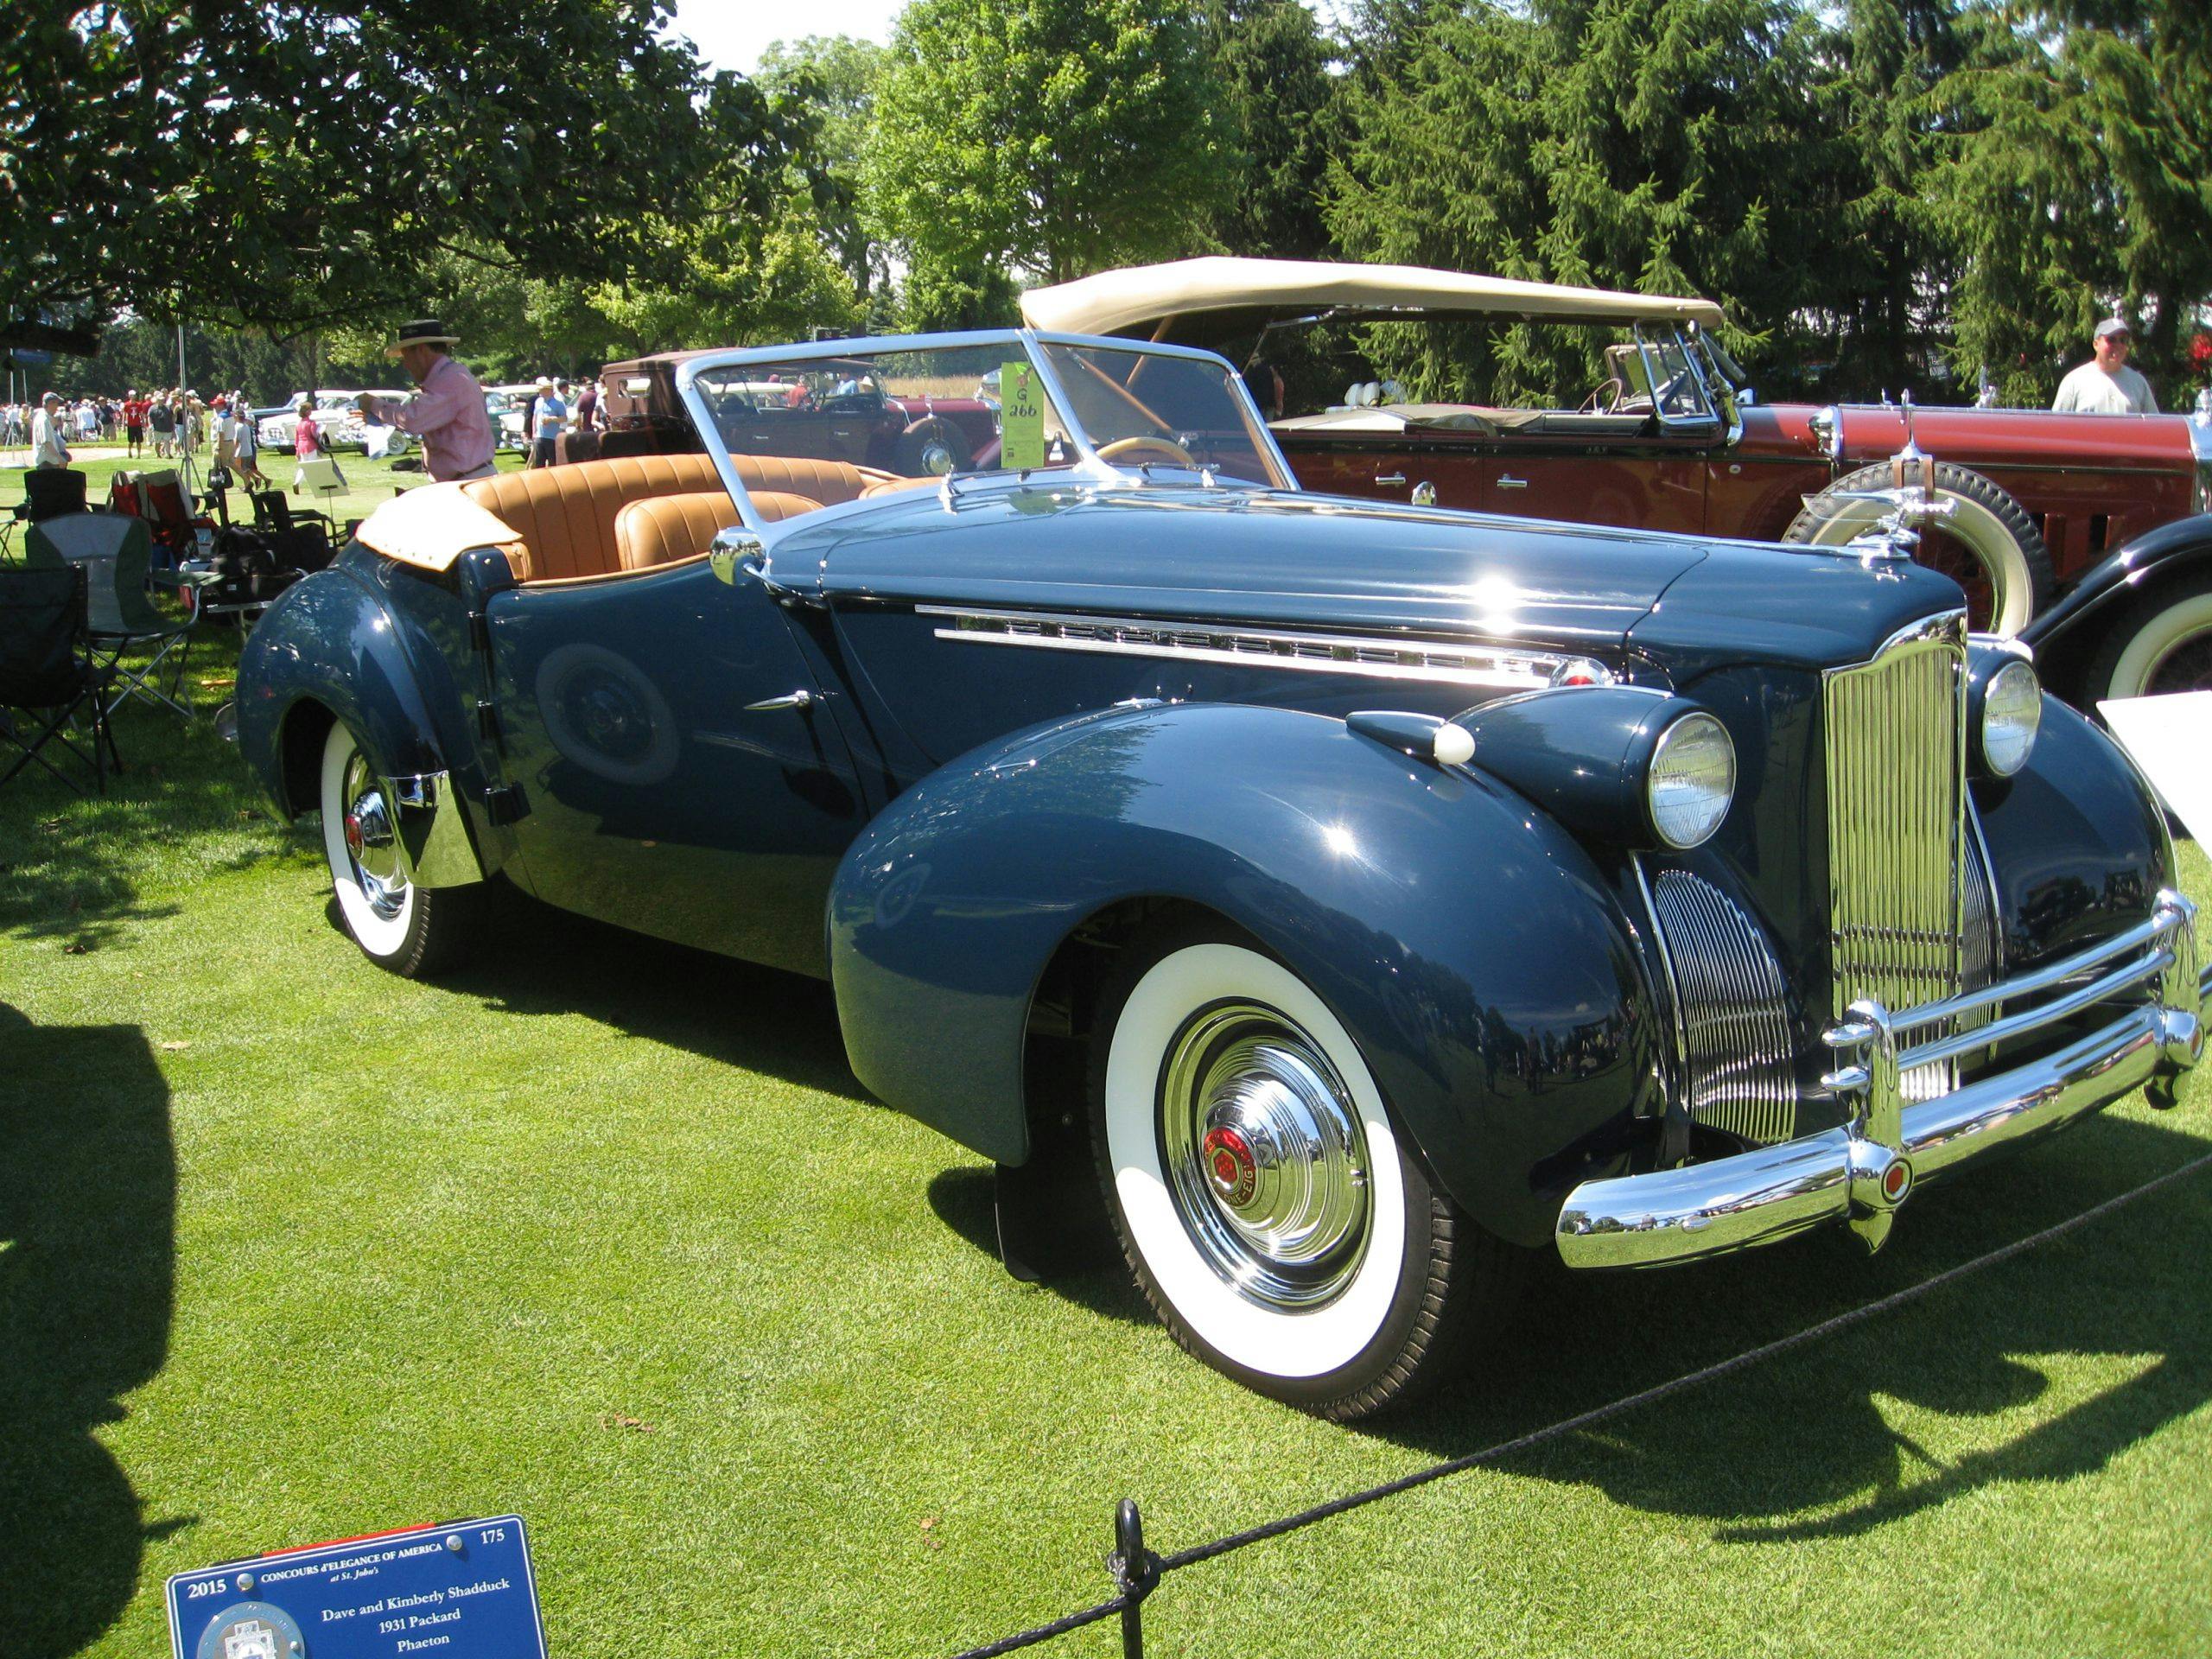 2015 Concours d'Elegance of America